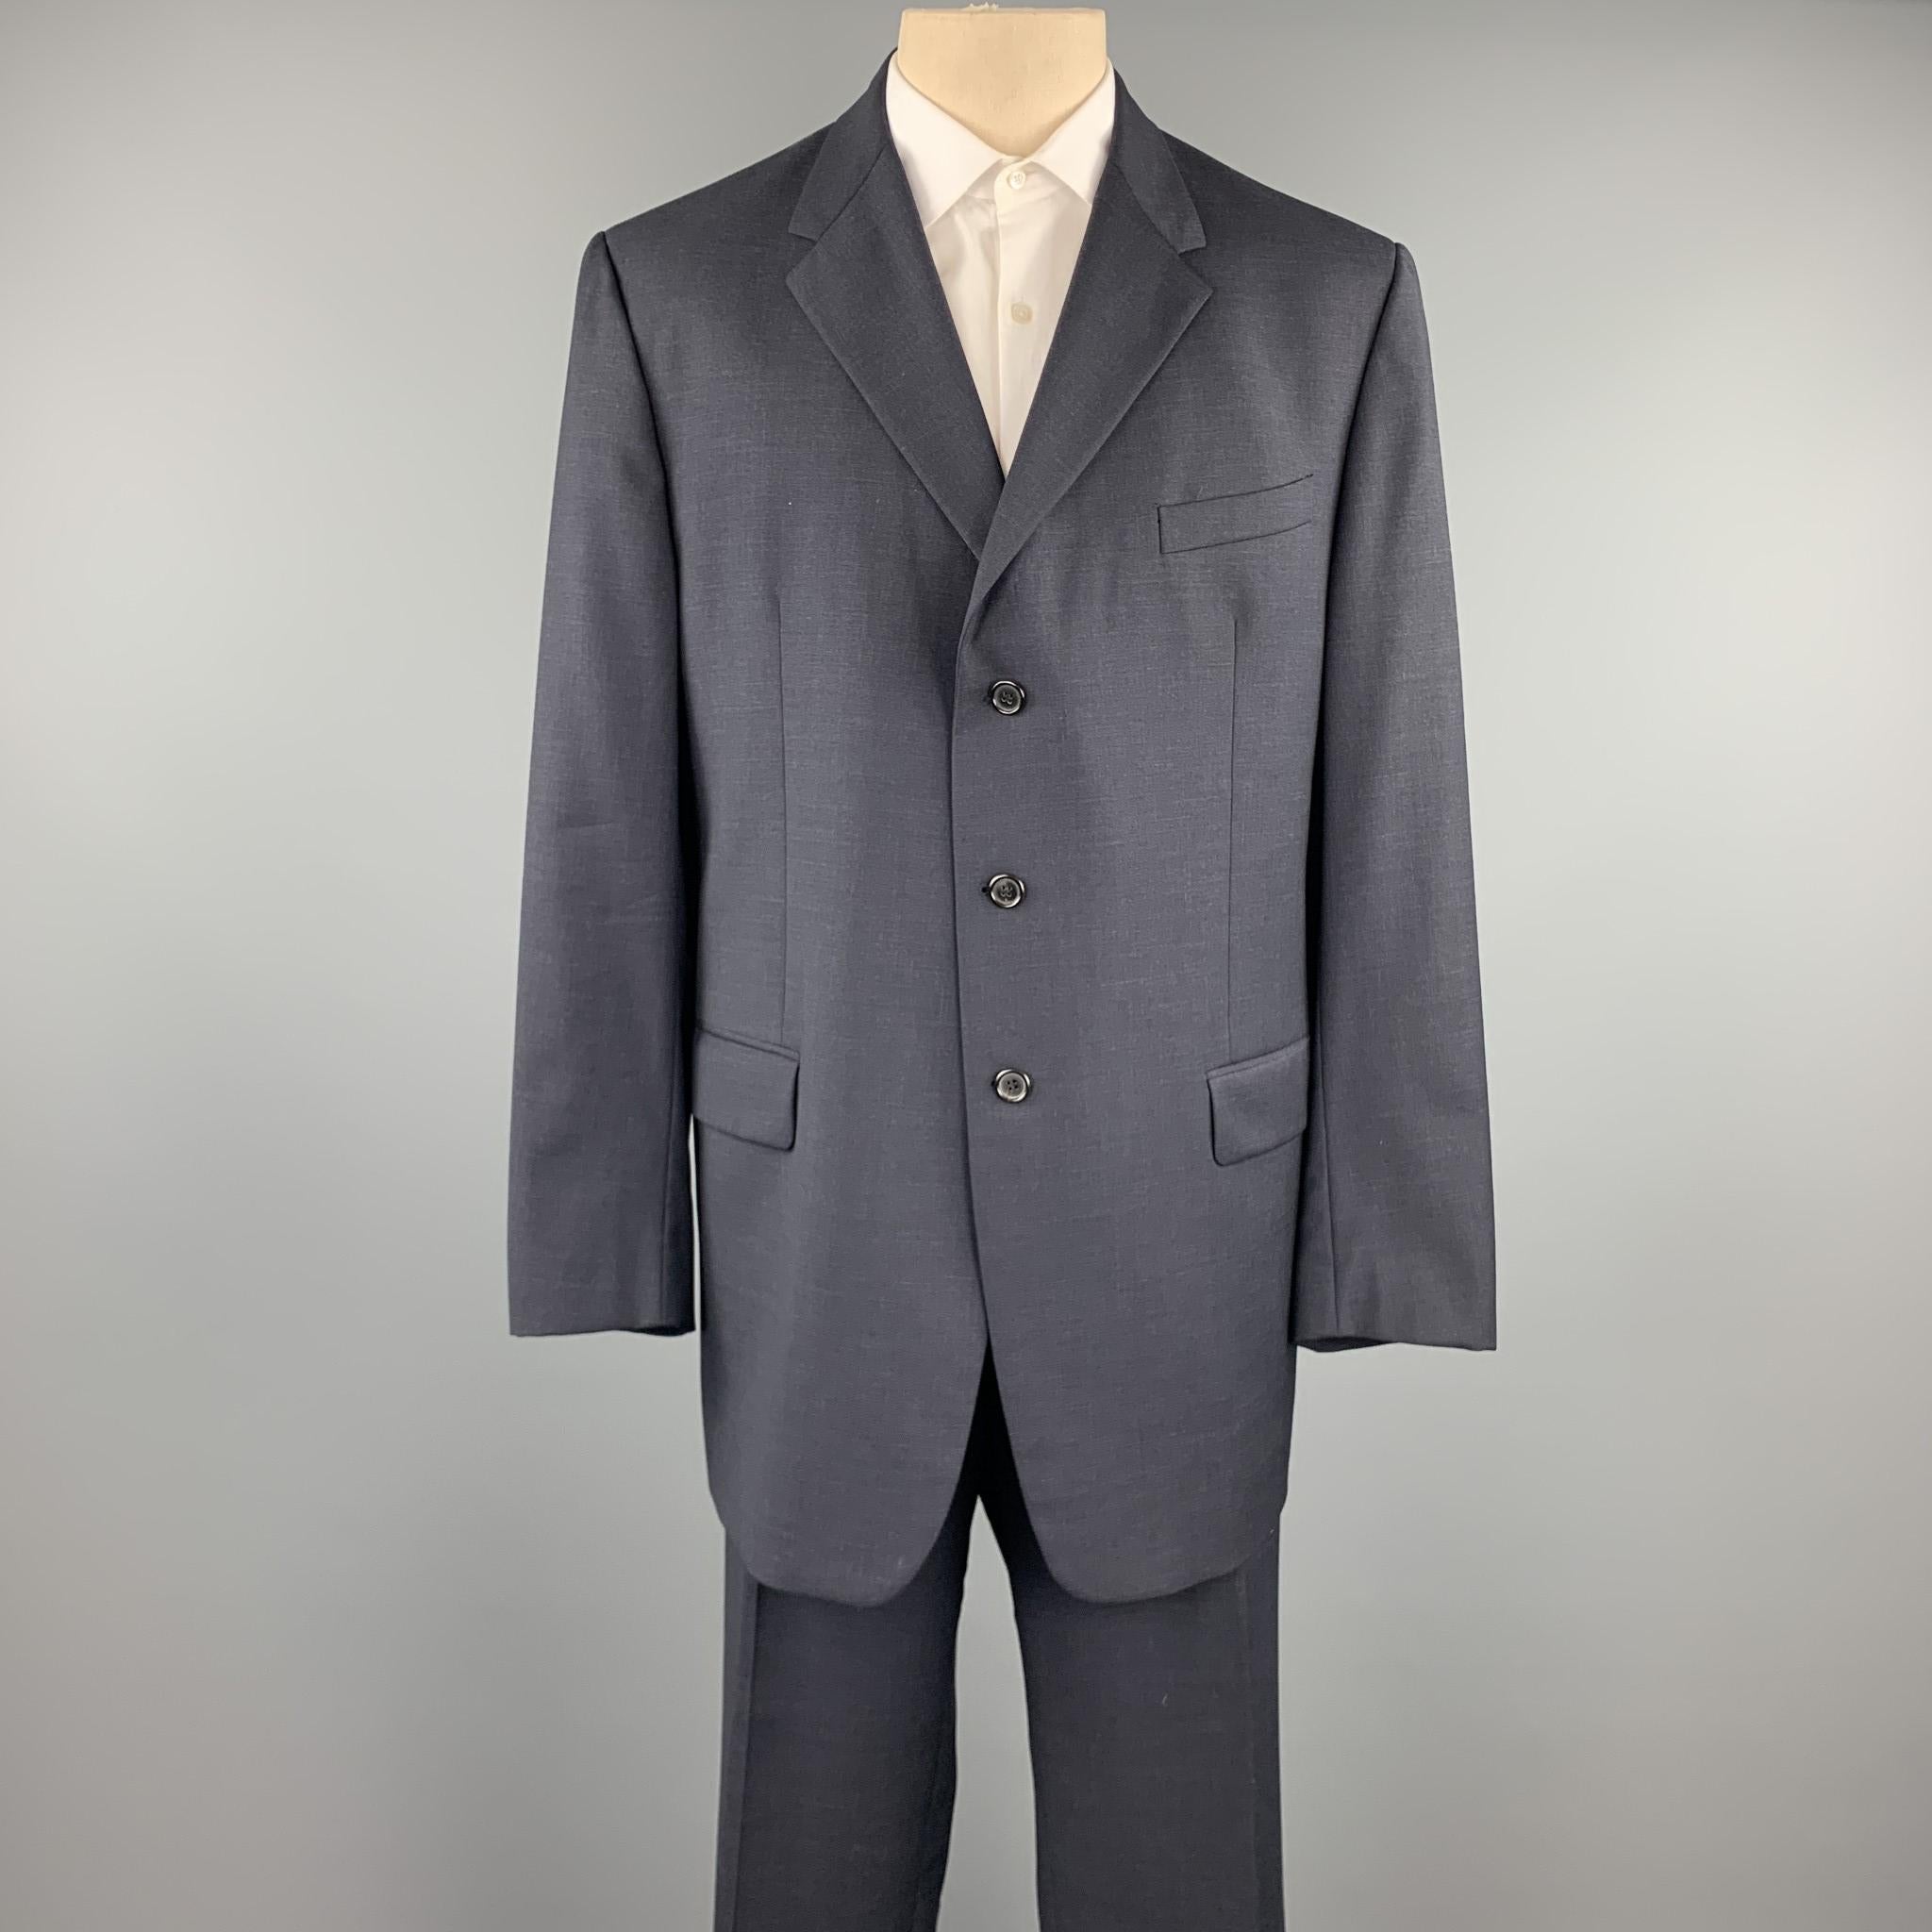 PRADA long suit comes in navy wool and includes a single breasted, three button sport coat with a notch lapel and matching flat front trousers. Made in Italy.

Excellent Pre-Owned Condition.
Marked: IT 58 L
Original Retail Price: